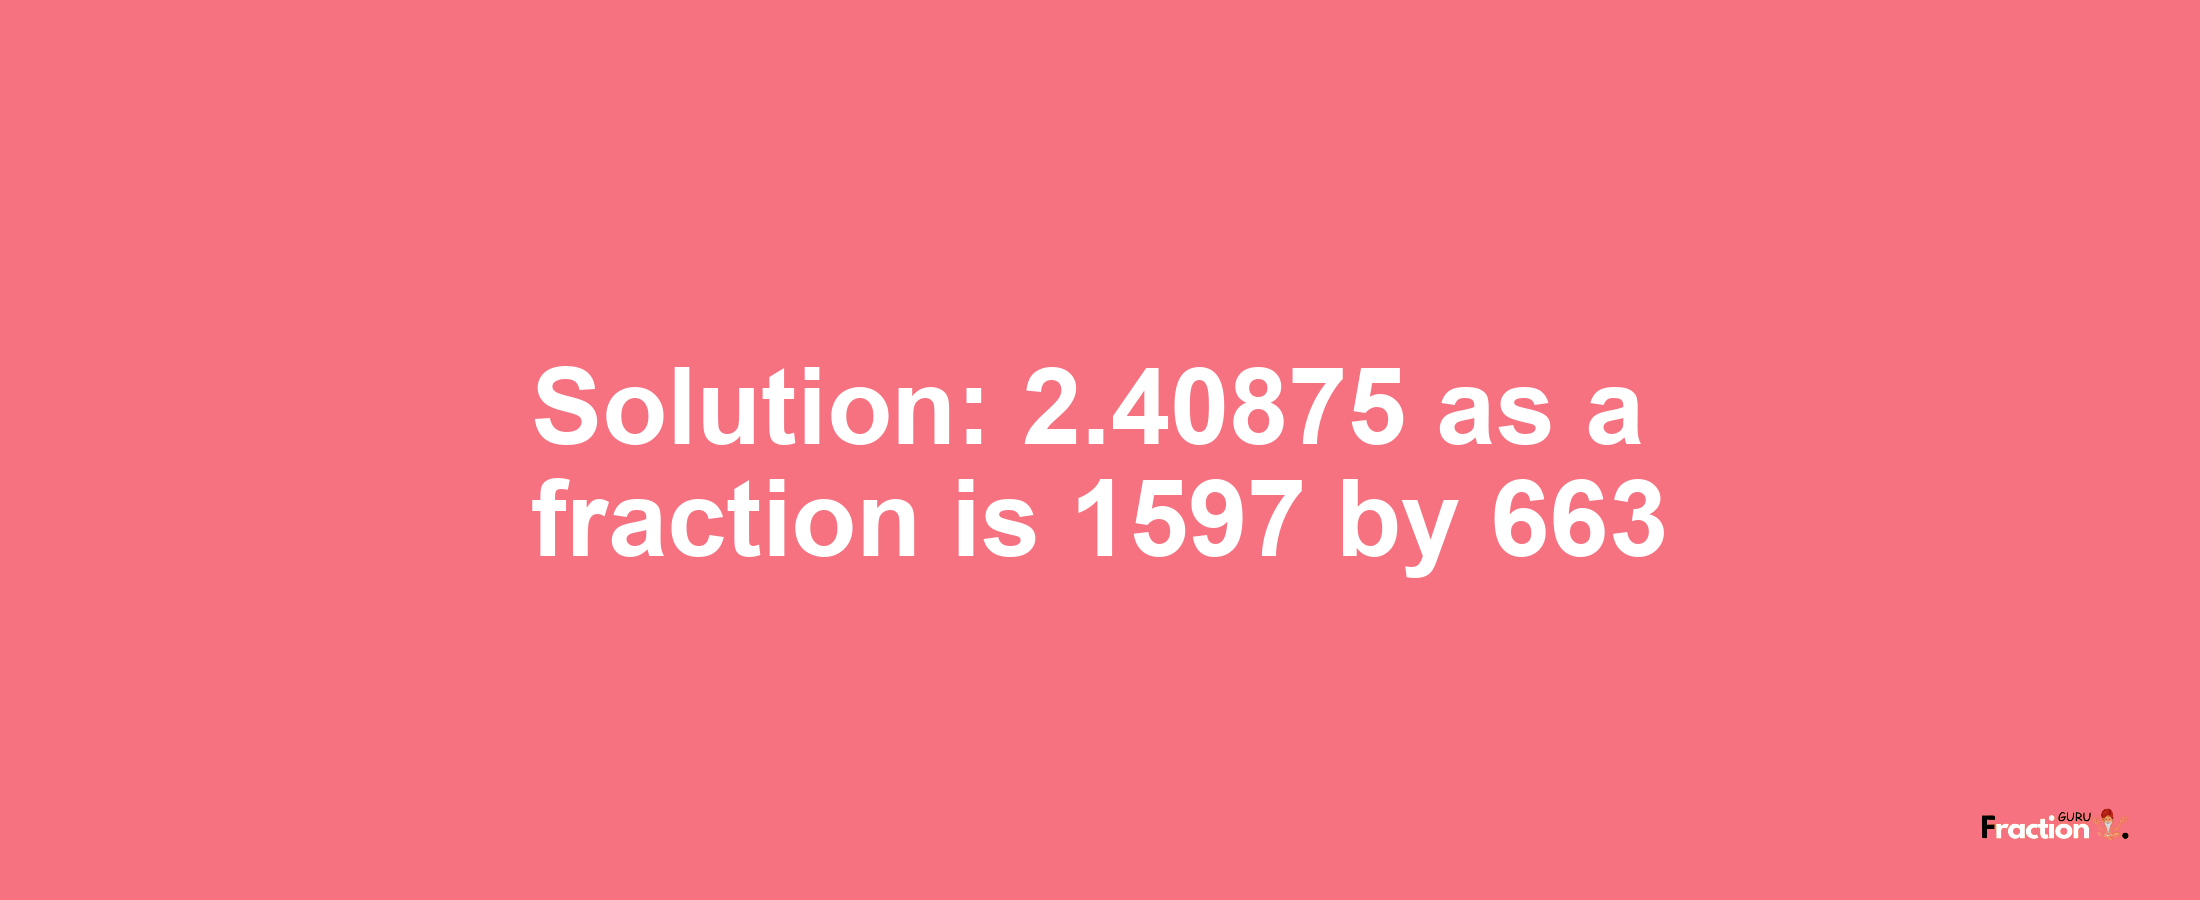 Solution:2.40875 as a fraction is 1597/663